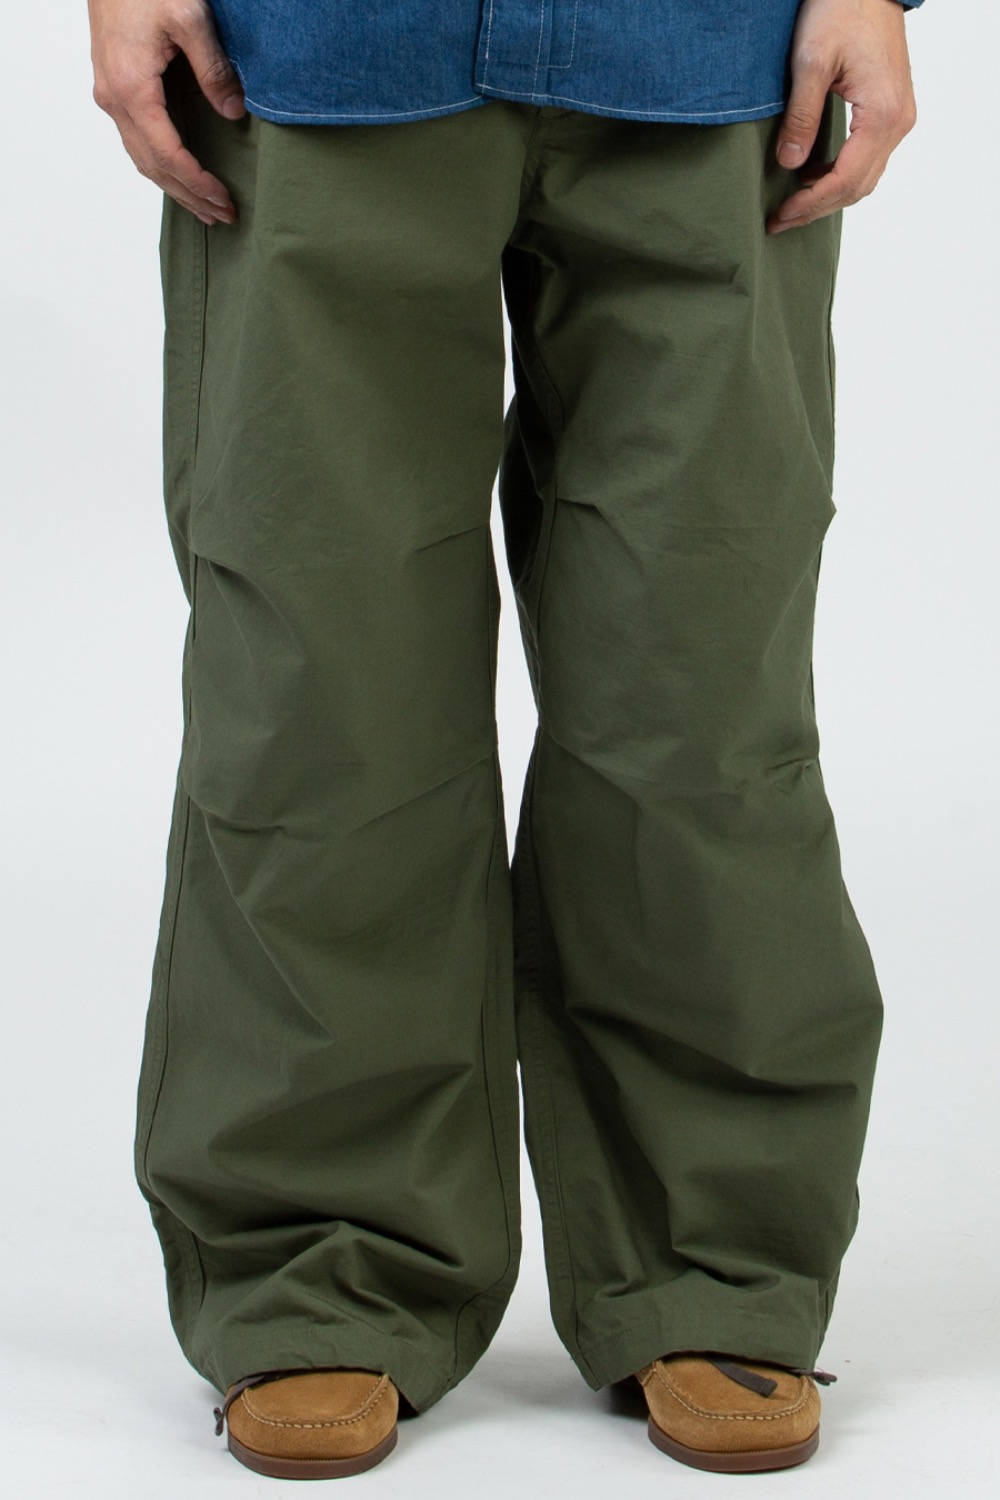 OVER PANT OLIVE COTTON RIPSTOP